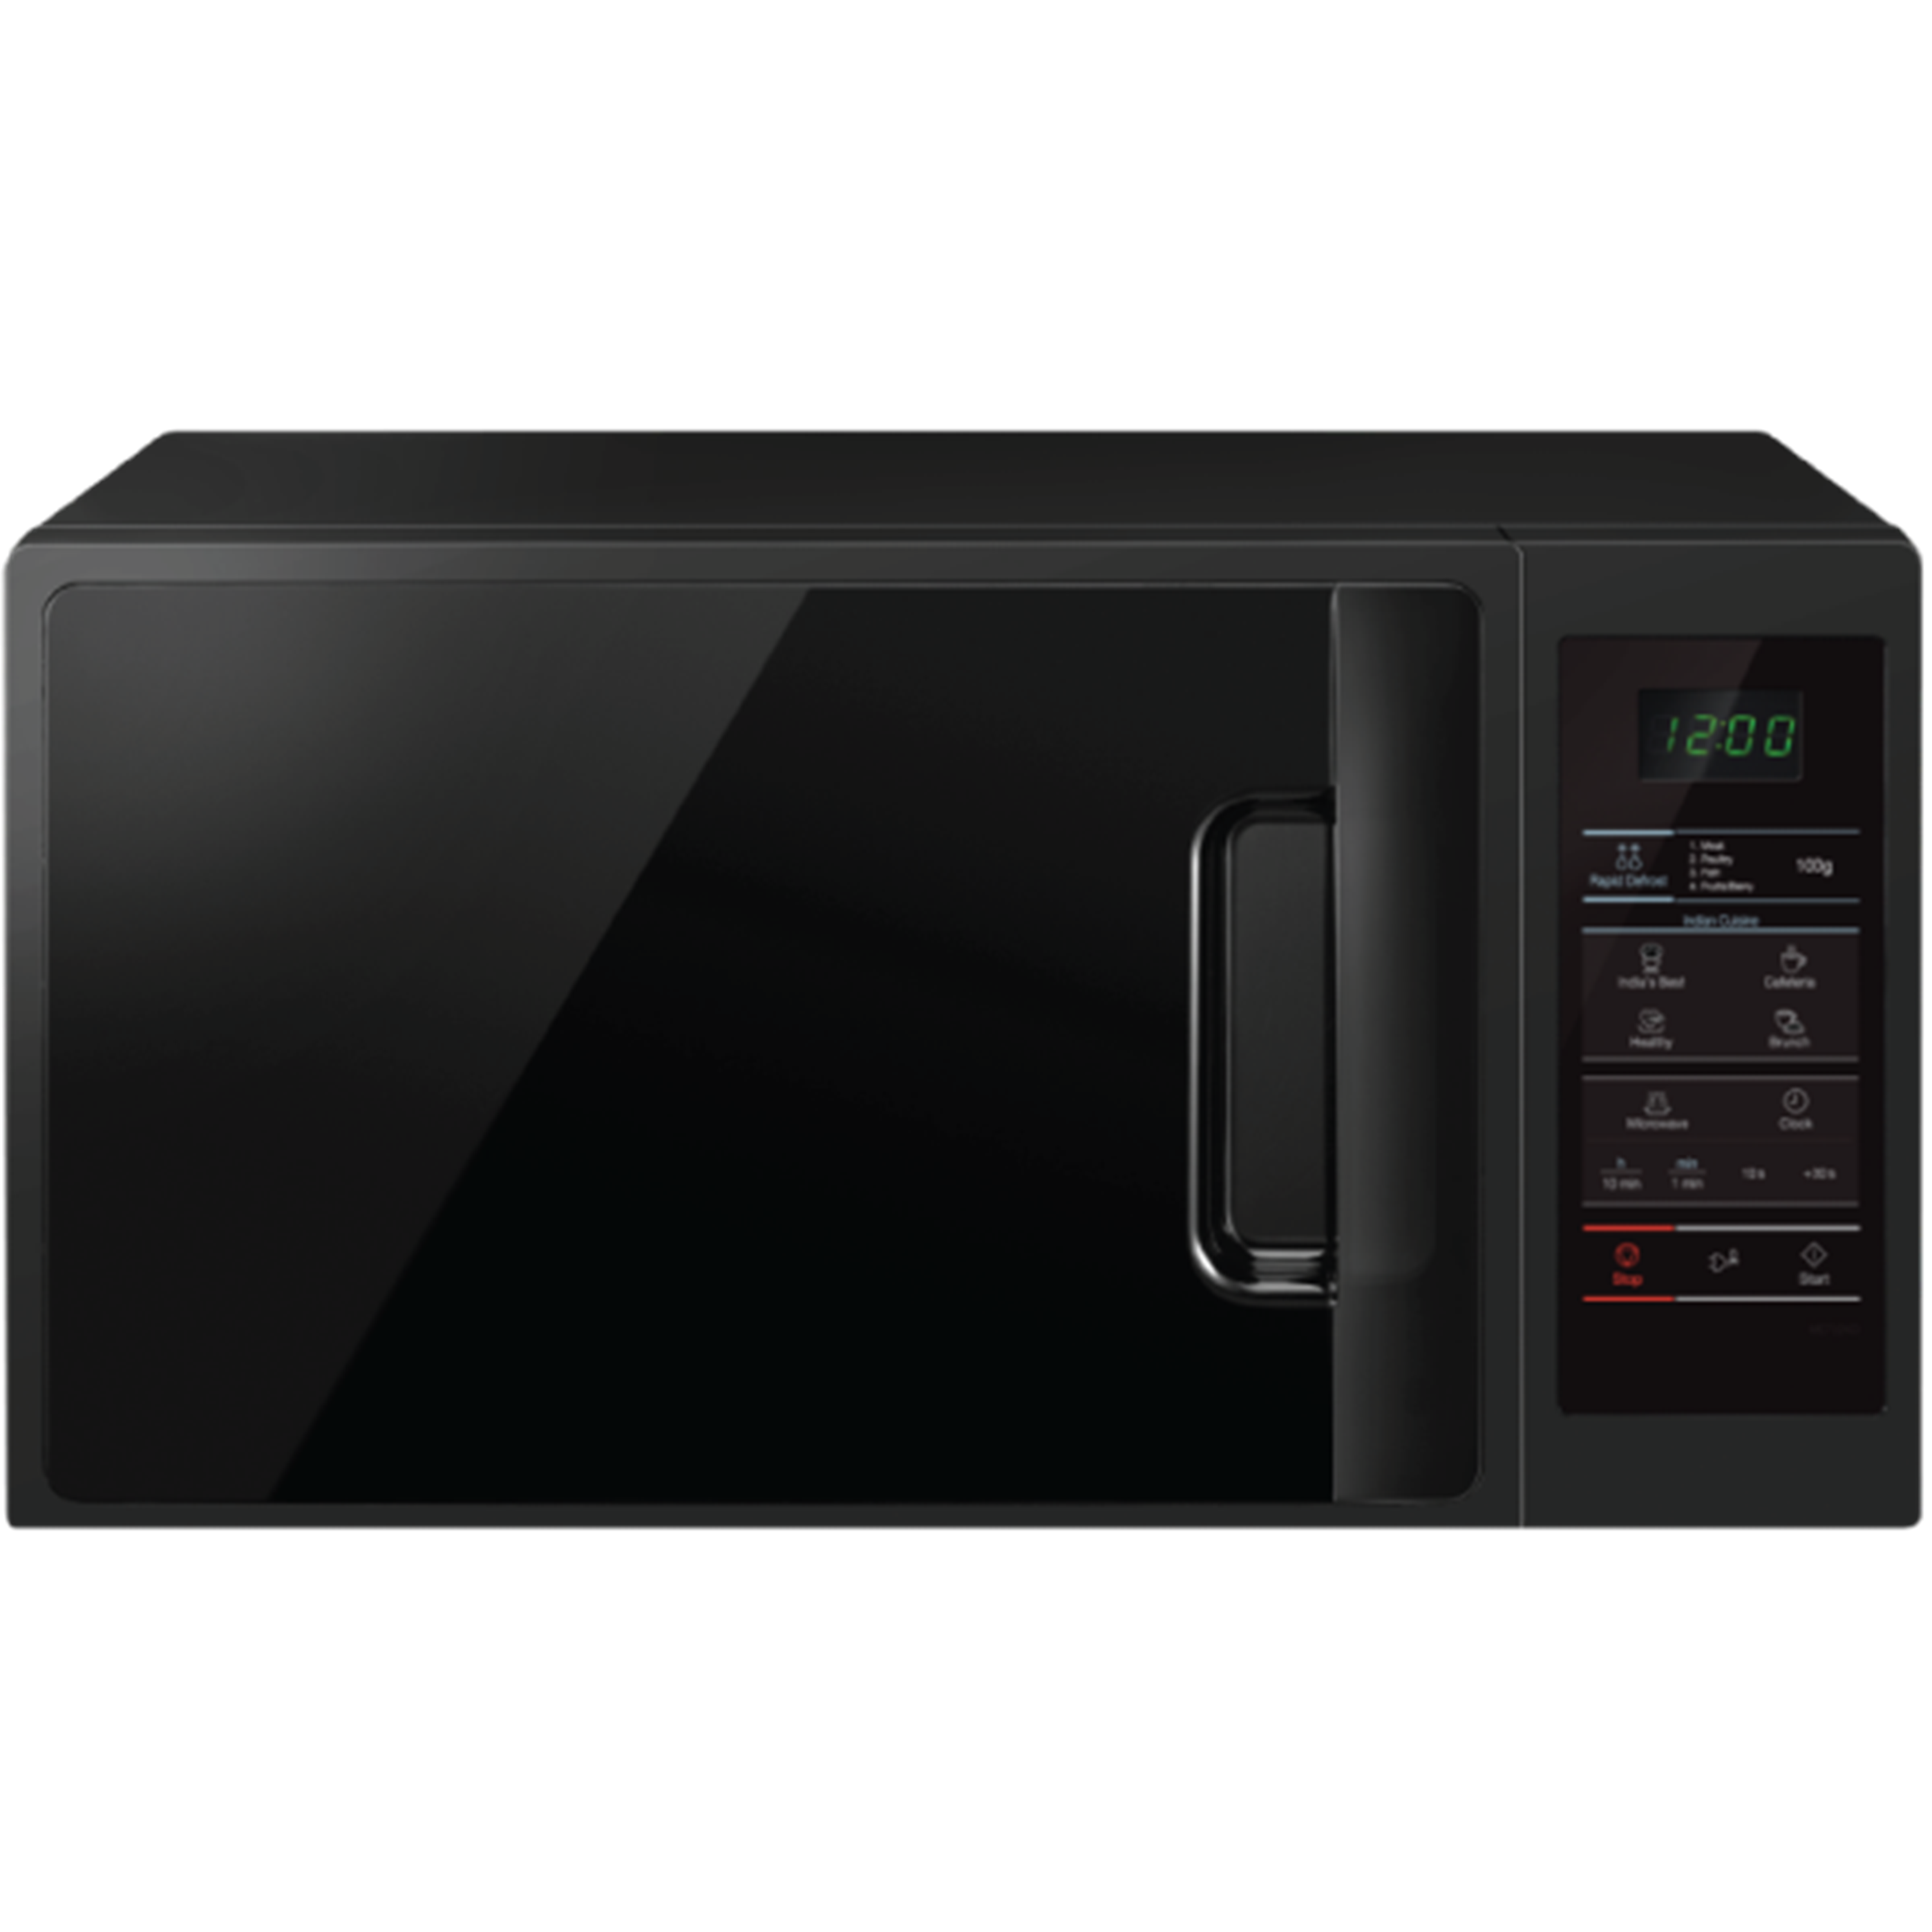 Samsung Microwave Oven PNG Image Background